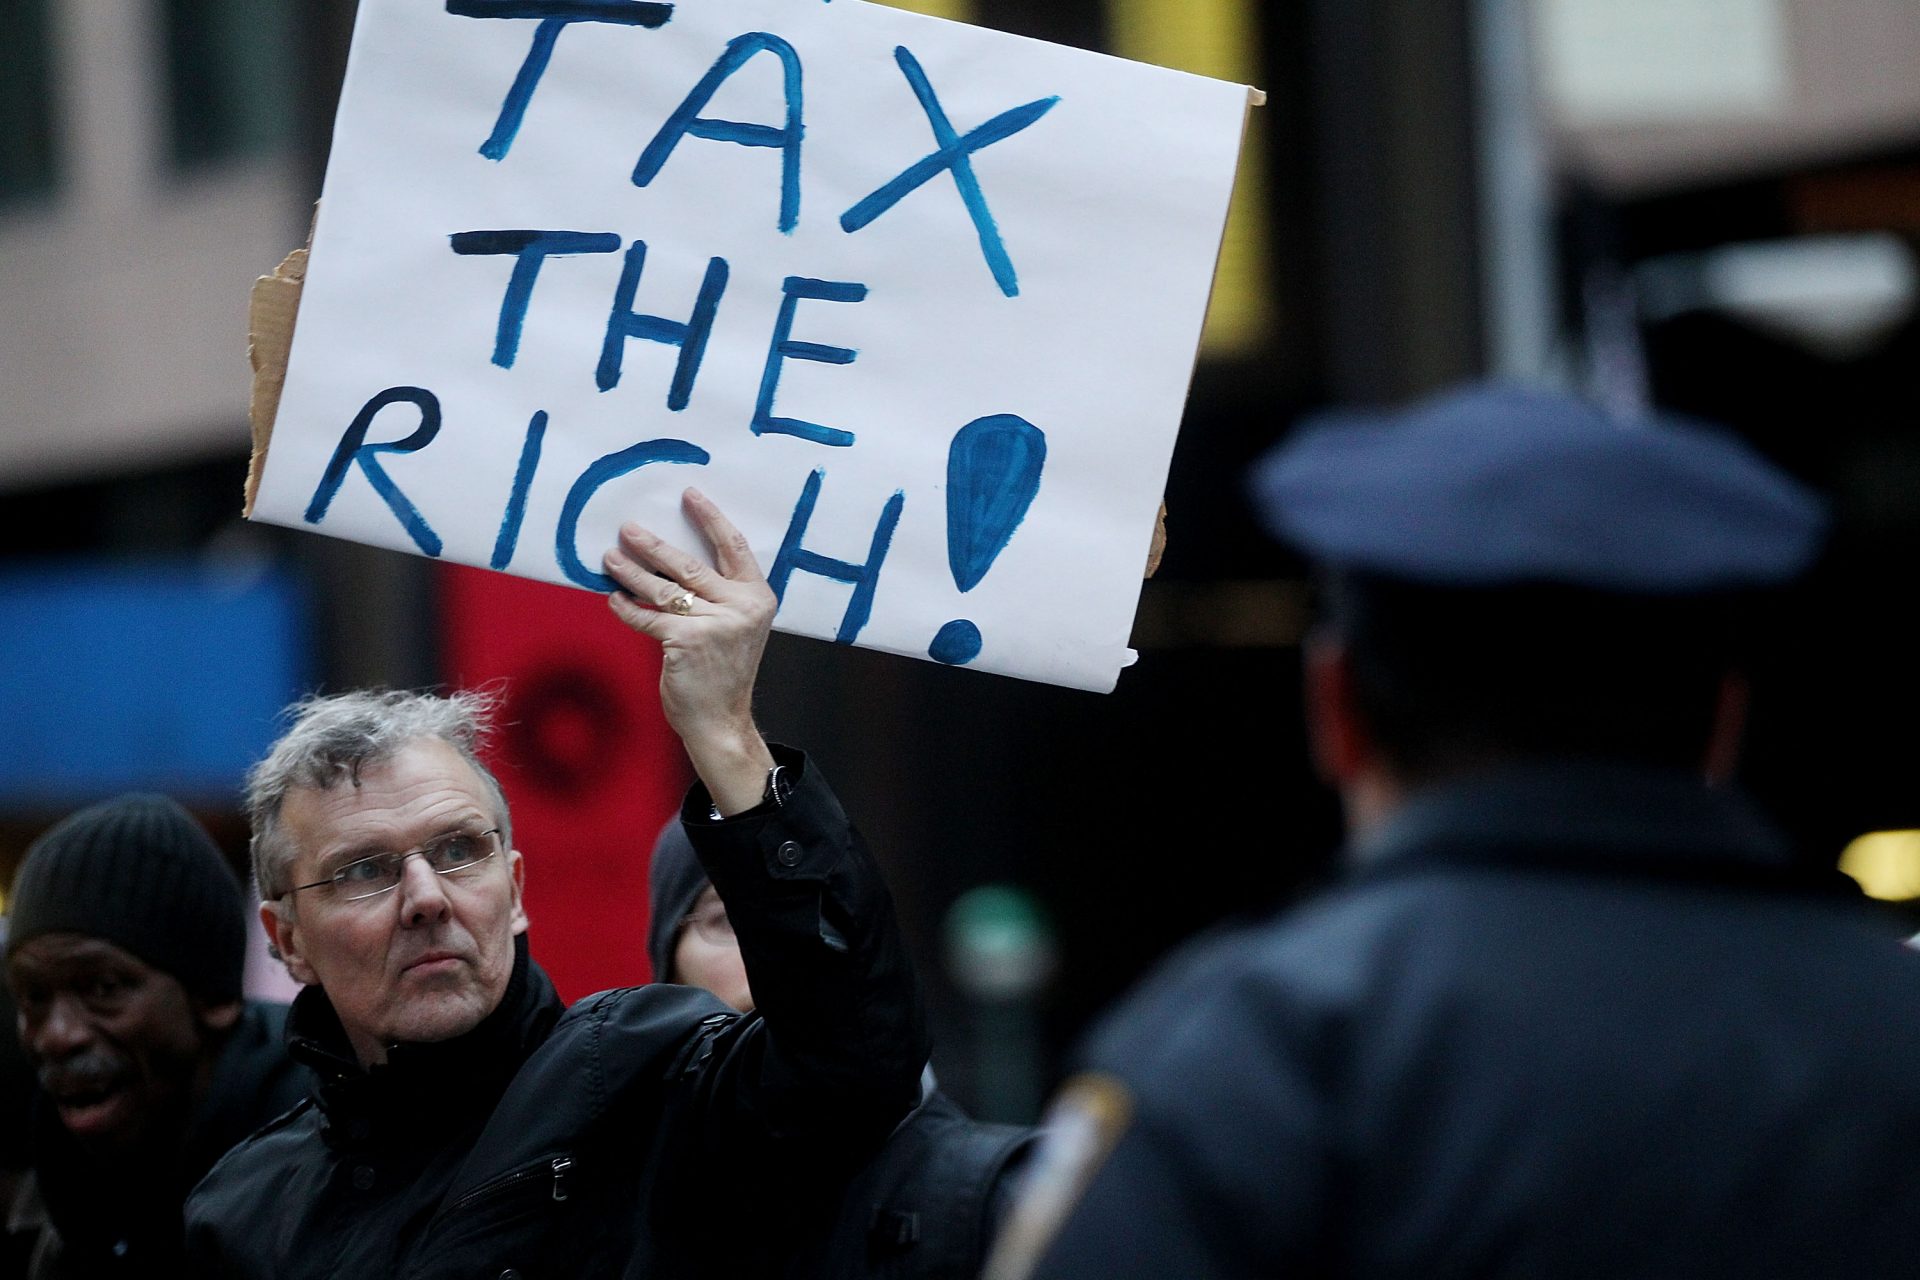 A majority of people want to tax the rich 